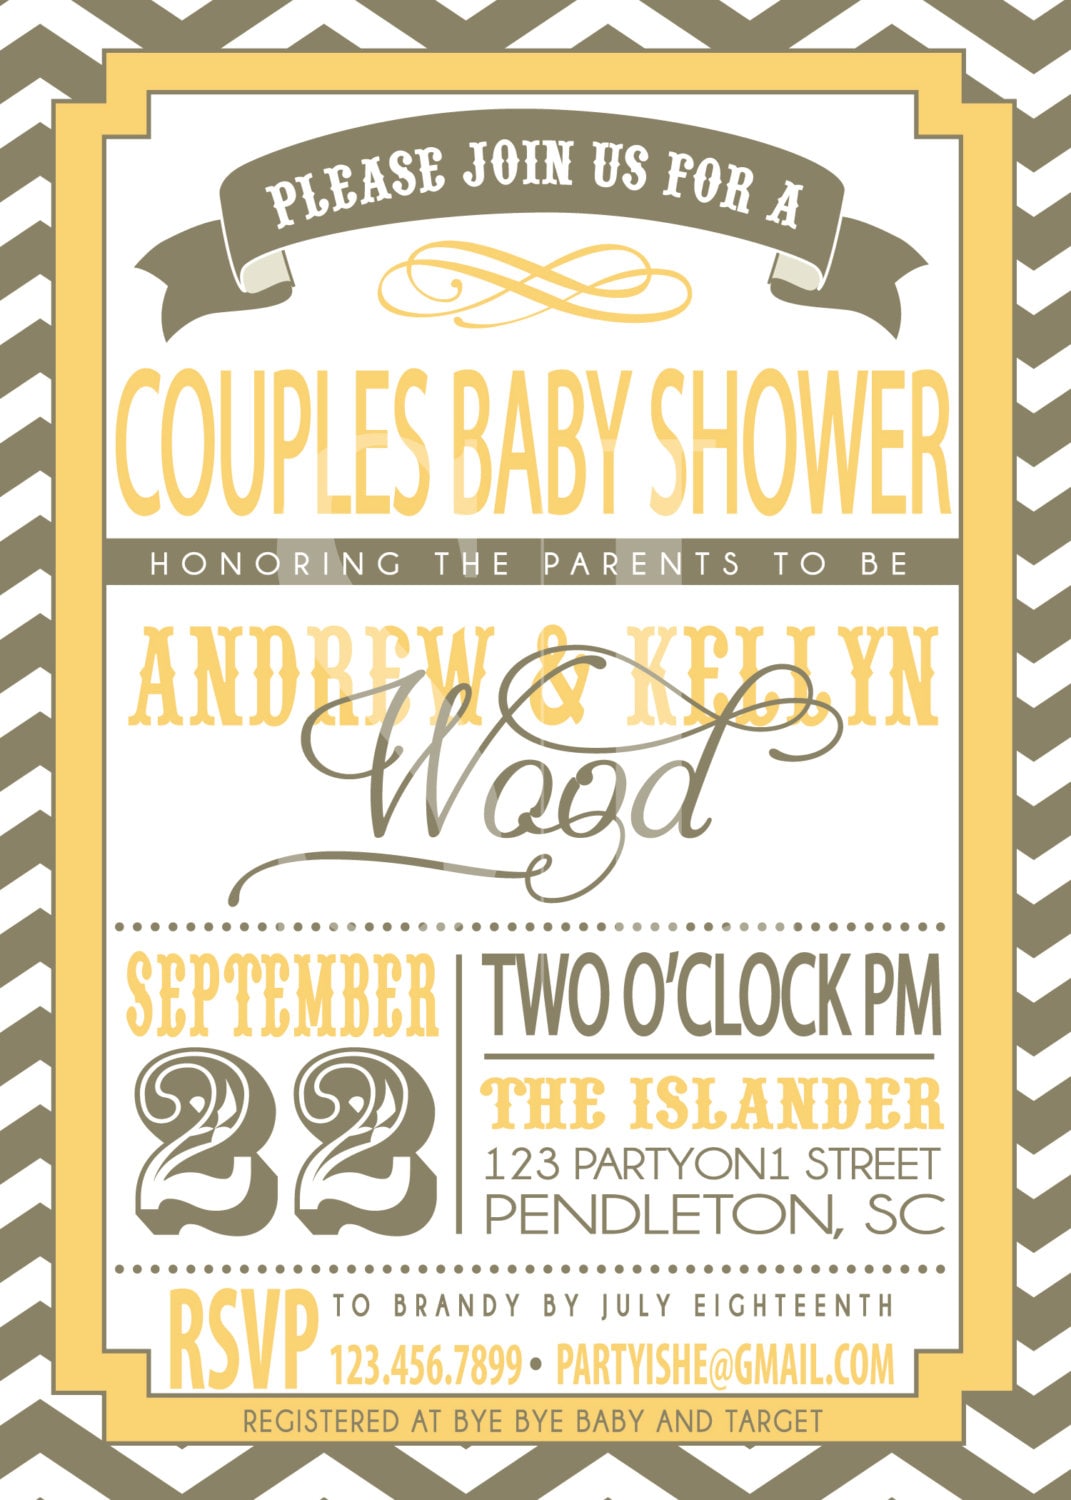 Couples Baby Shower Wording On Invitations 1